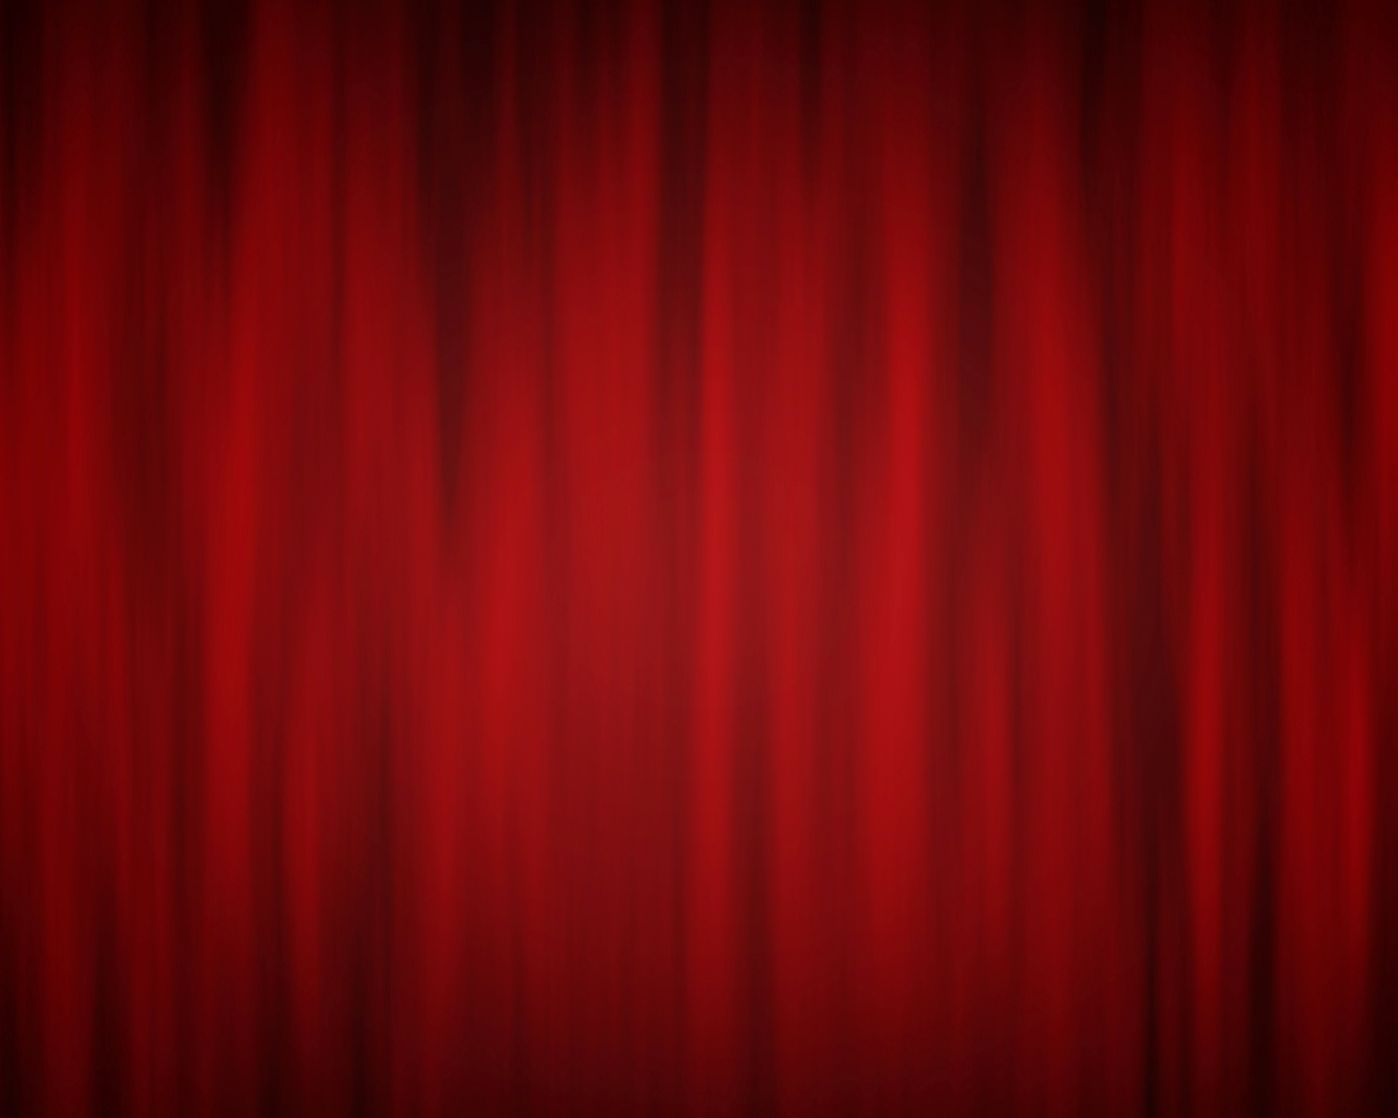 Black & Red Backgrounds